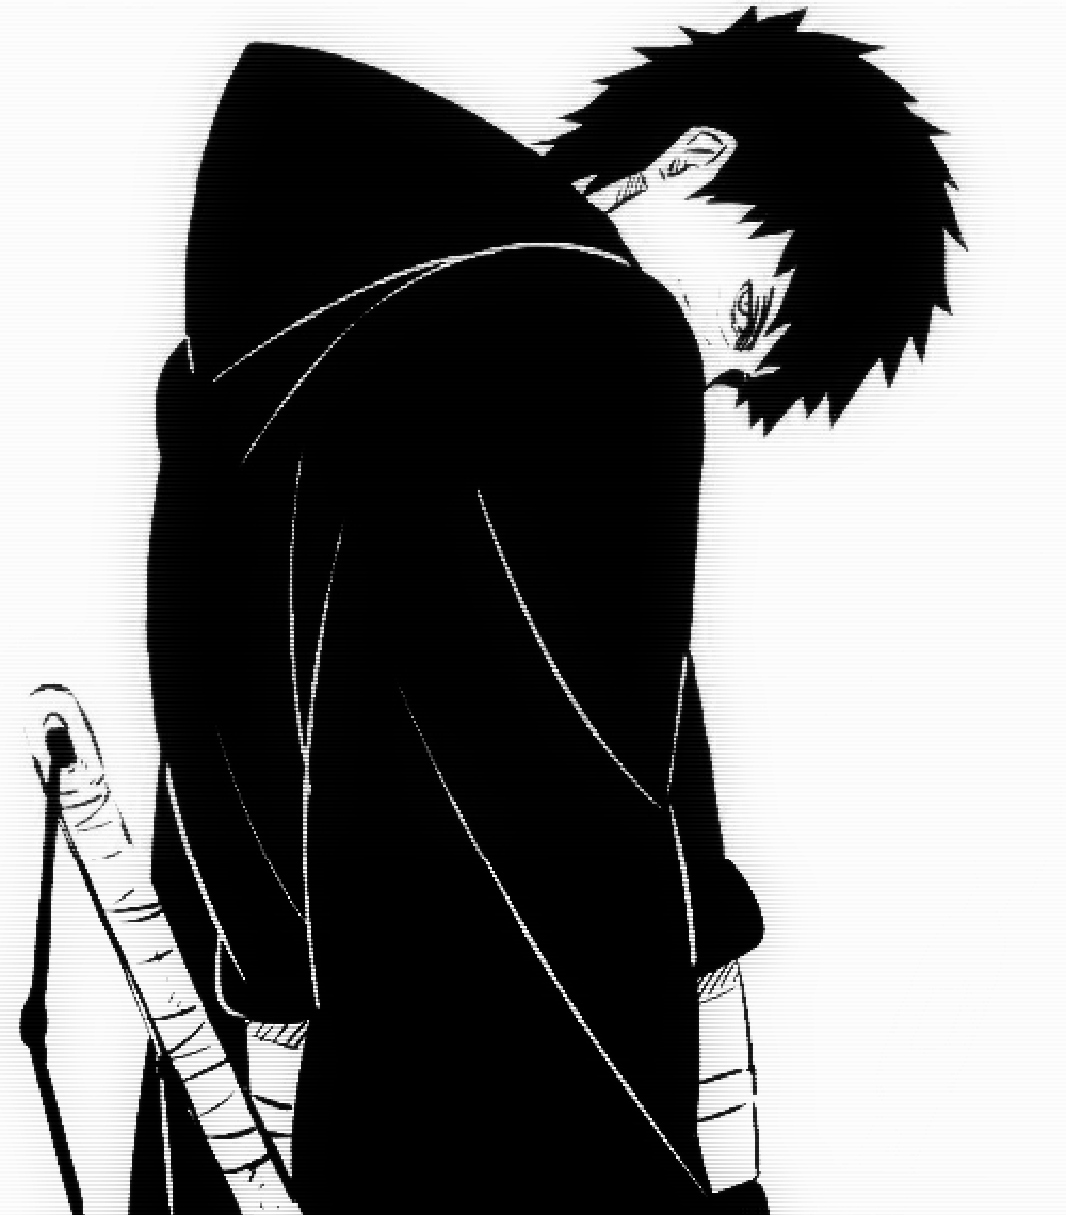 obito wallpaper iphone,fictional character,black and white,illustration,anime,black hair